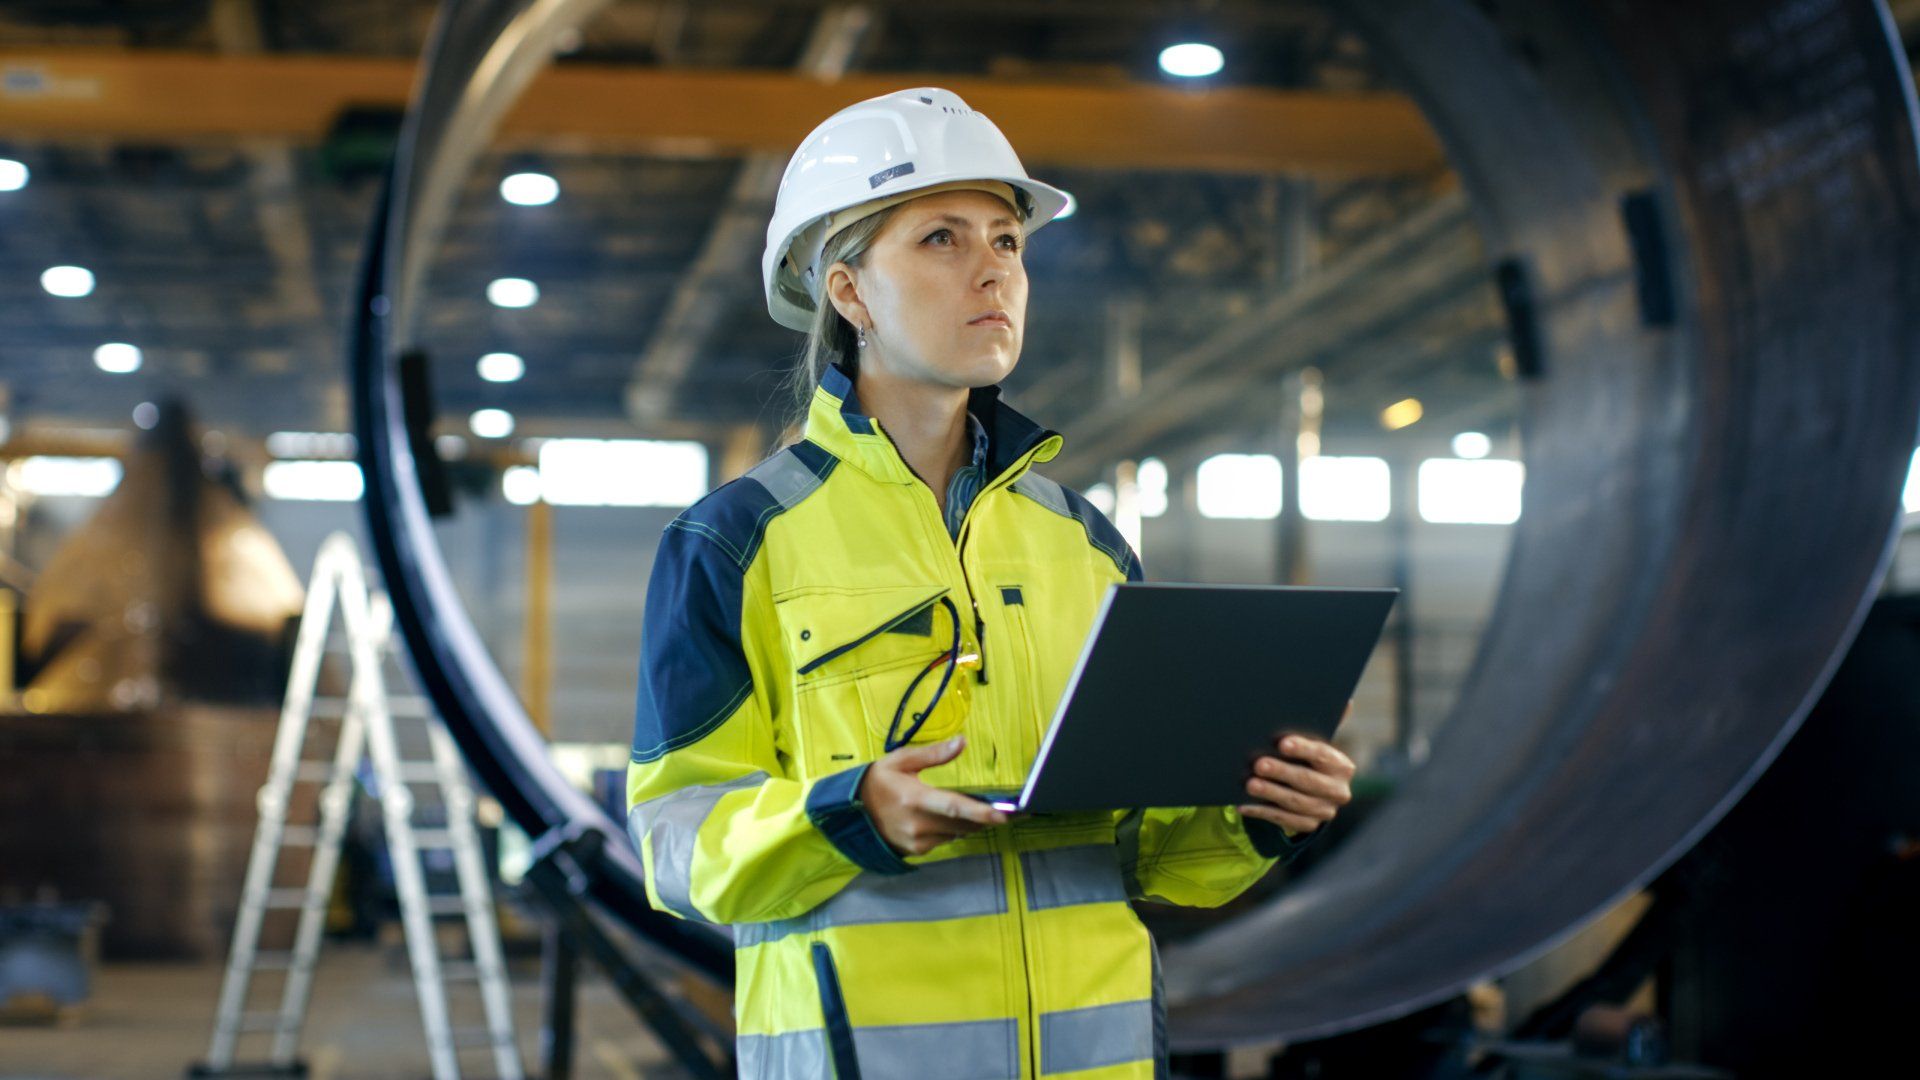 Civil Engineer (young woman) with hard hat, high viz and clipboard in aerospace manufacturing setting, representing Skilled Worker Visa applicants.